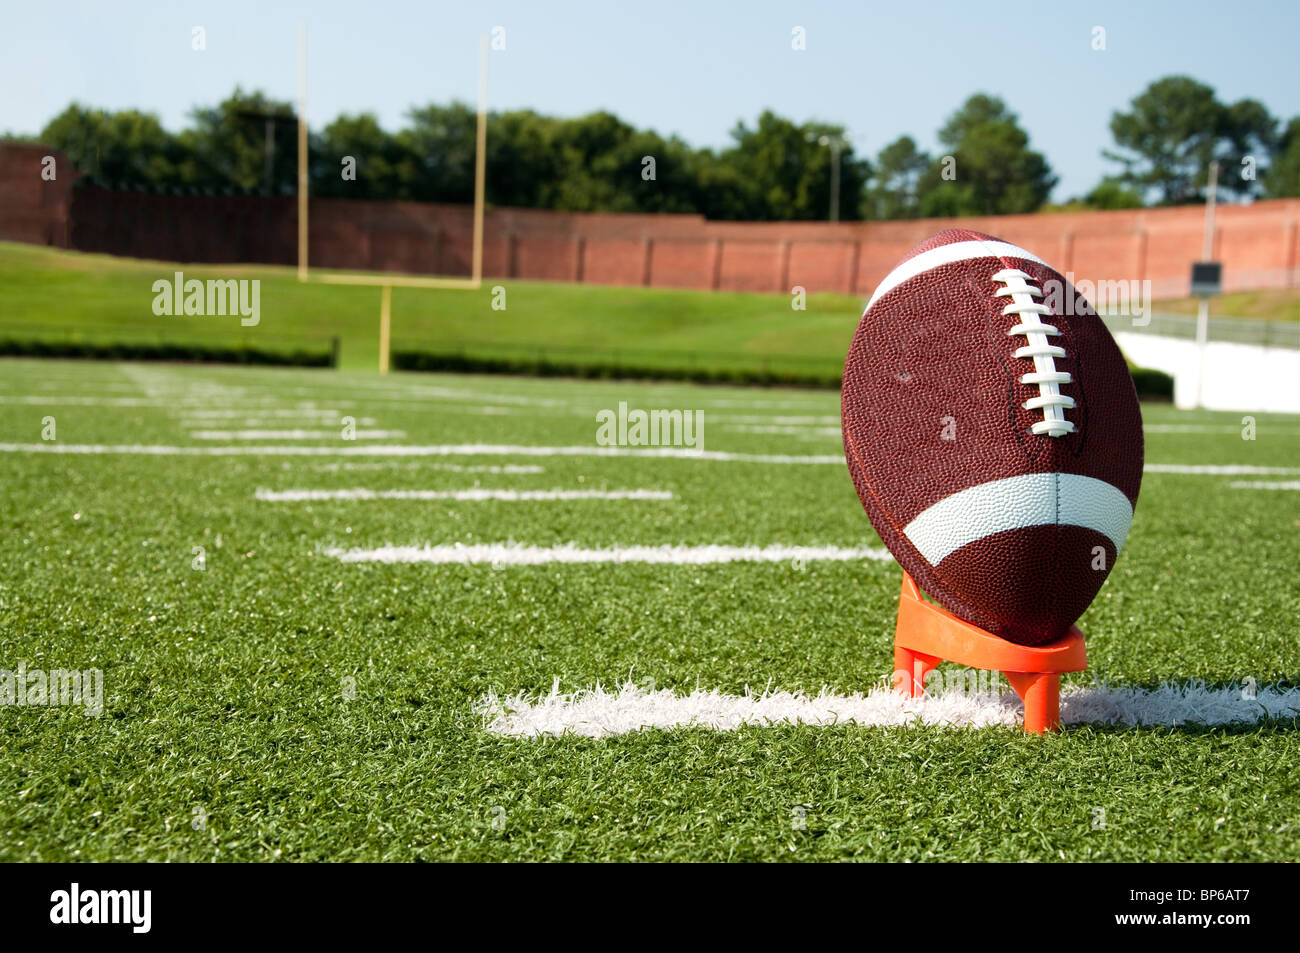 American football on kicking tee on field with goal post in background. Stock Photo